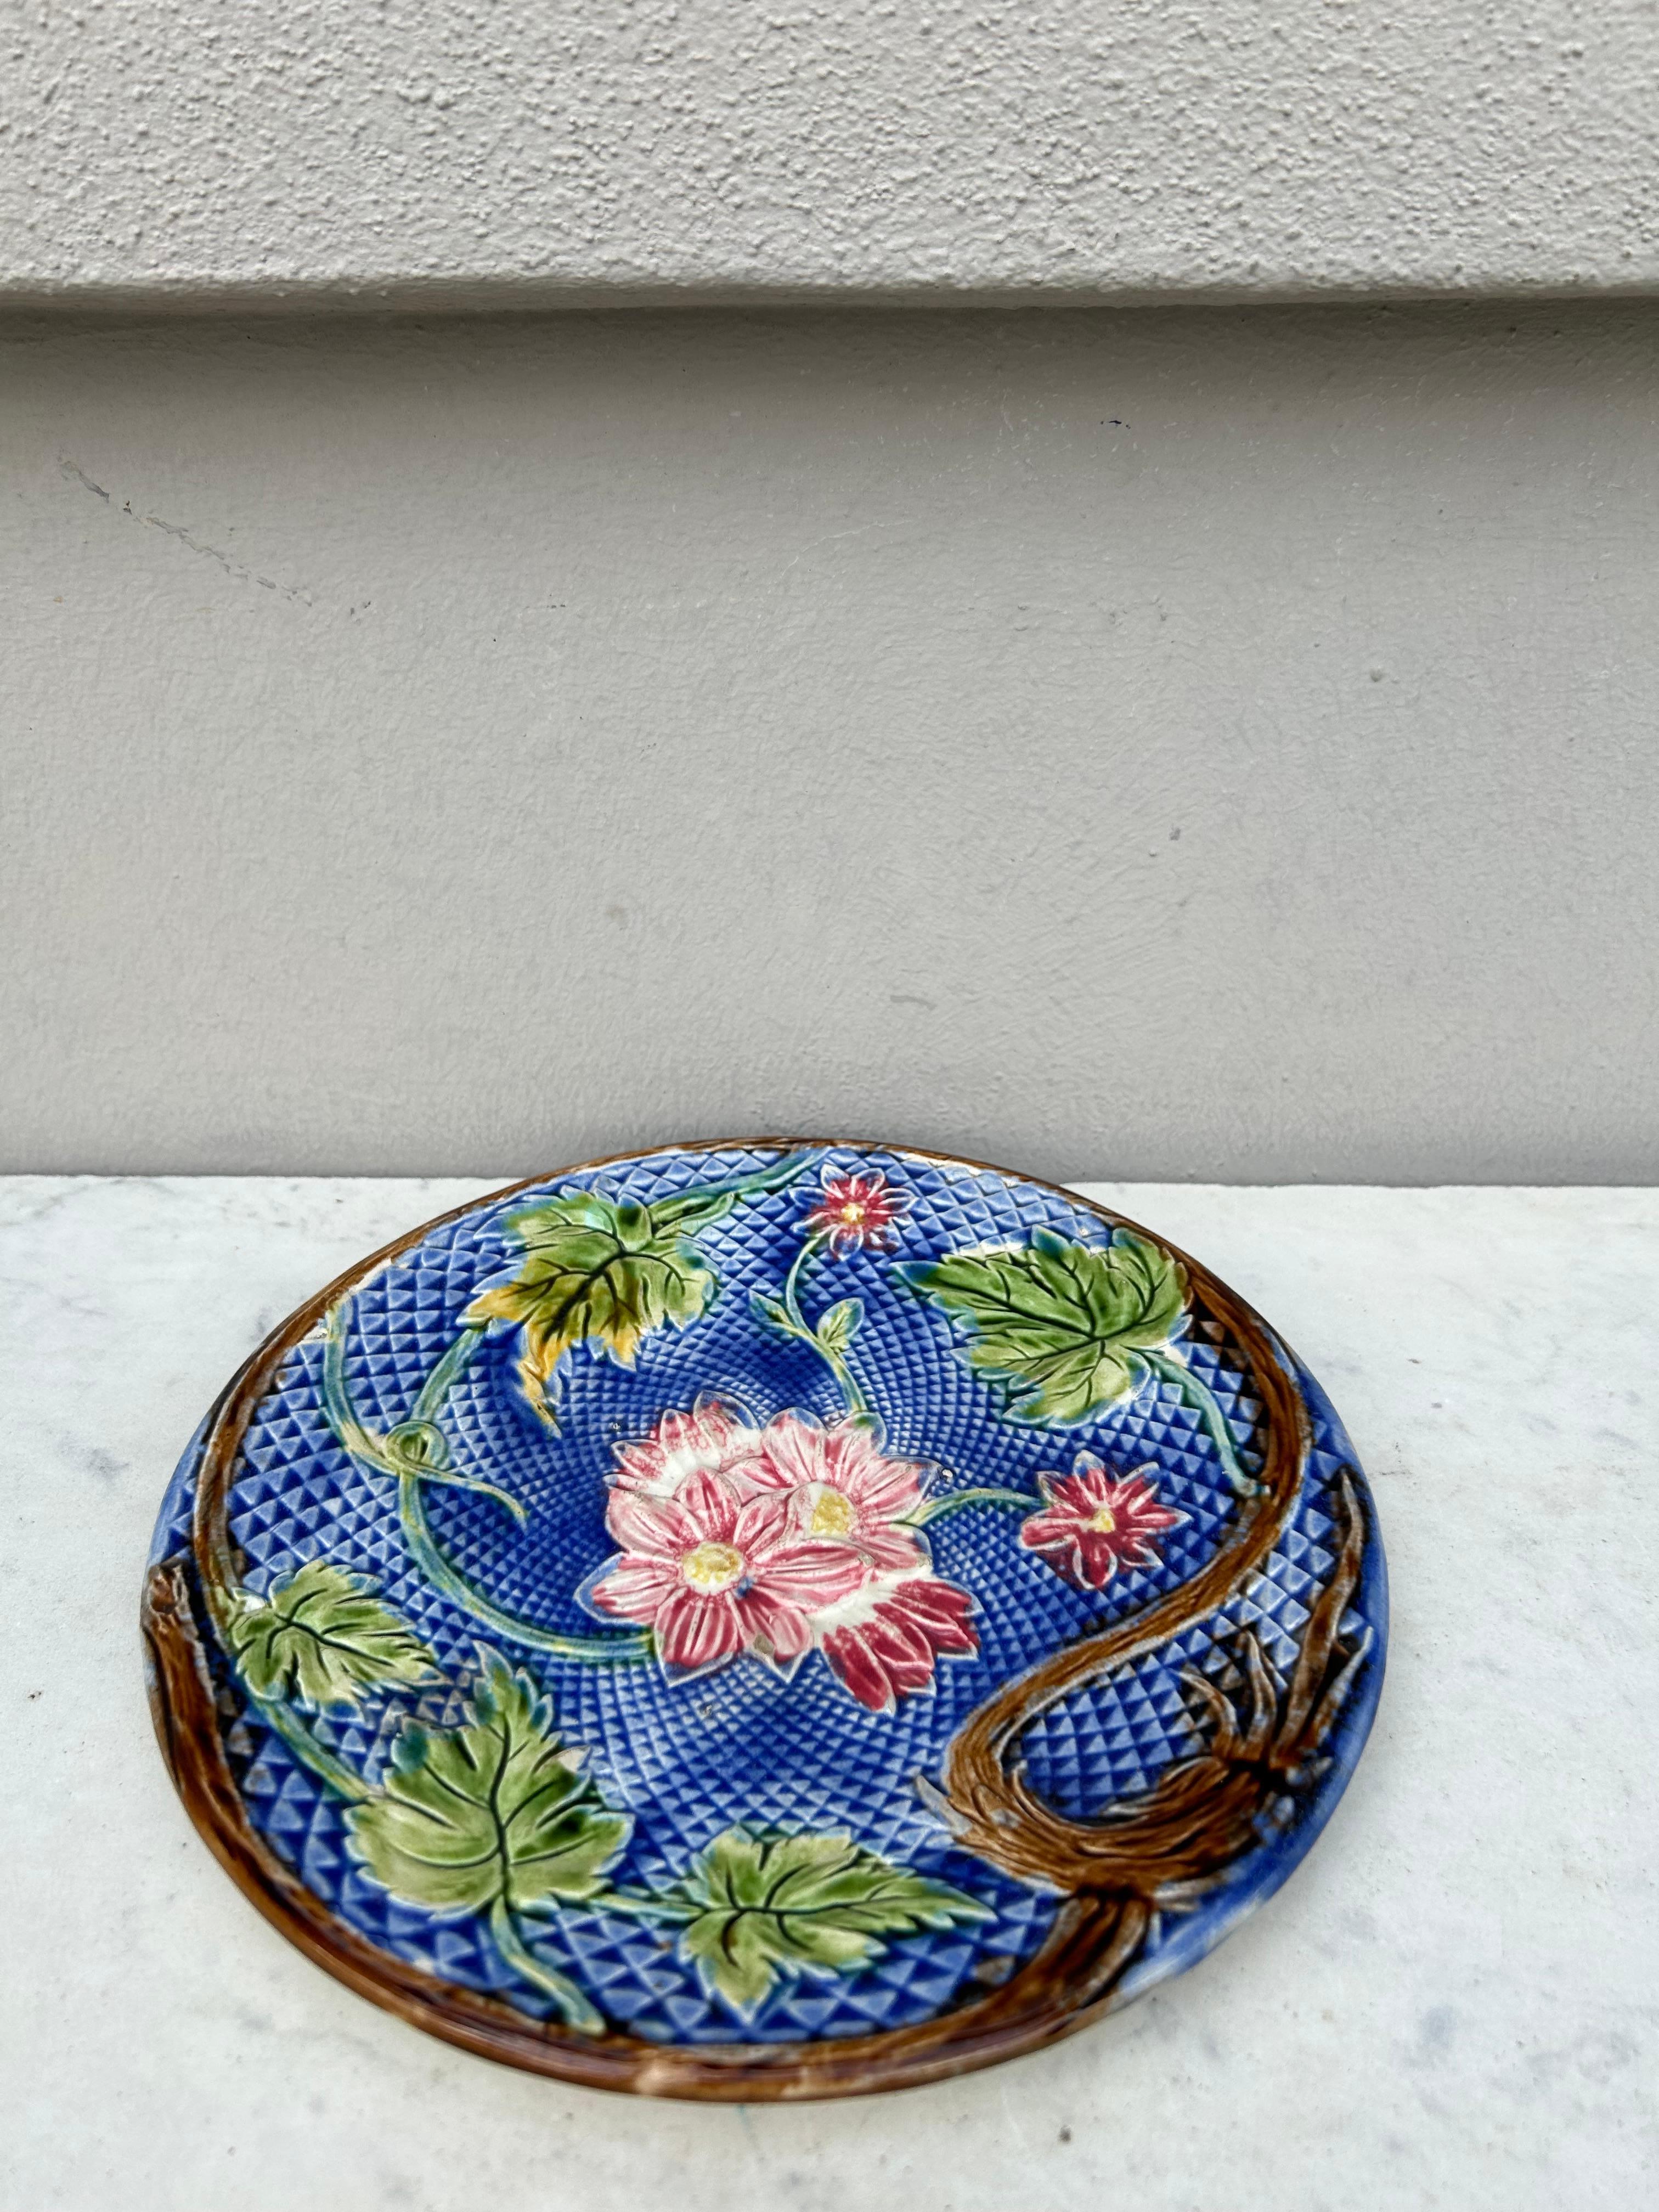 Lovely French Majolica plate pink flowers on a blue basket weave, circa 1880 attributed to Salins.
Very rare color.